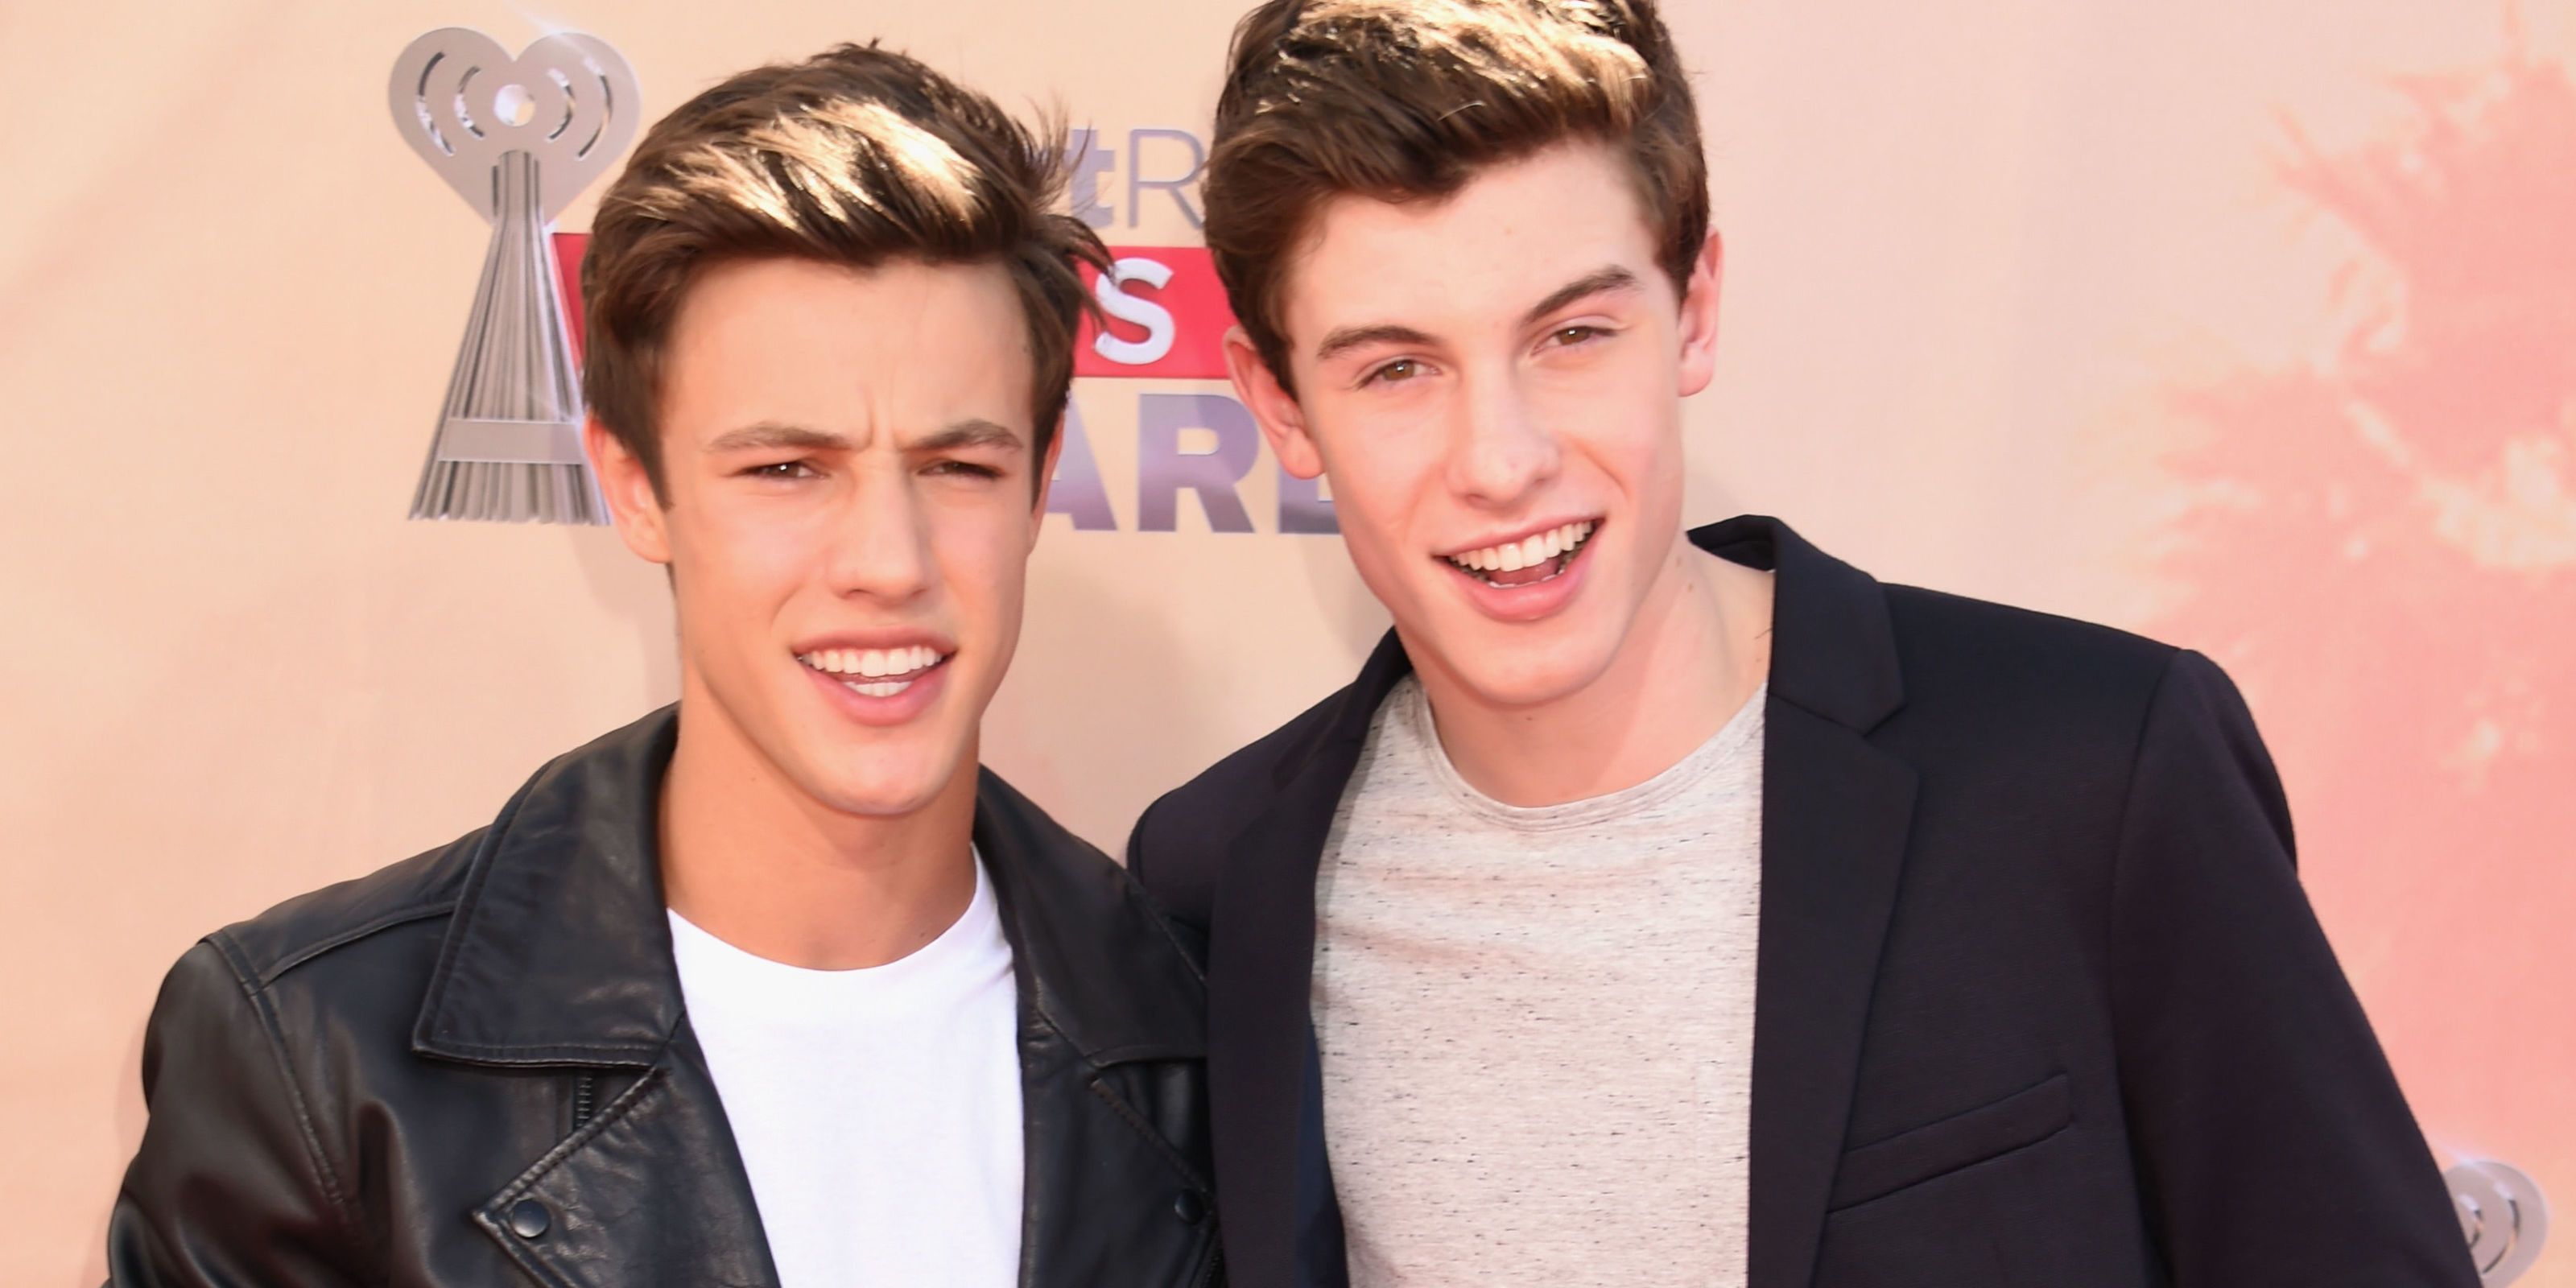 shawn mendes and cameron dallas dating who